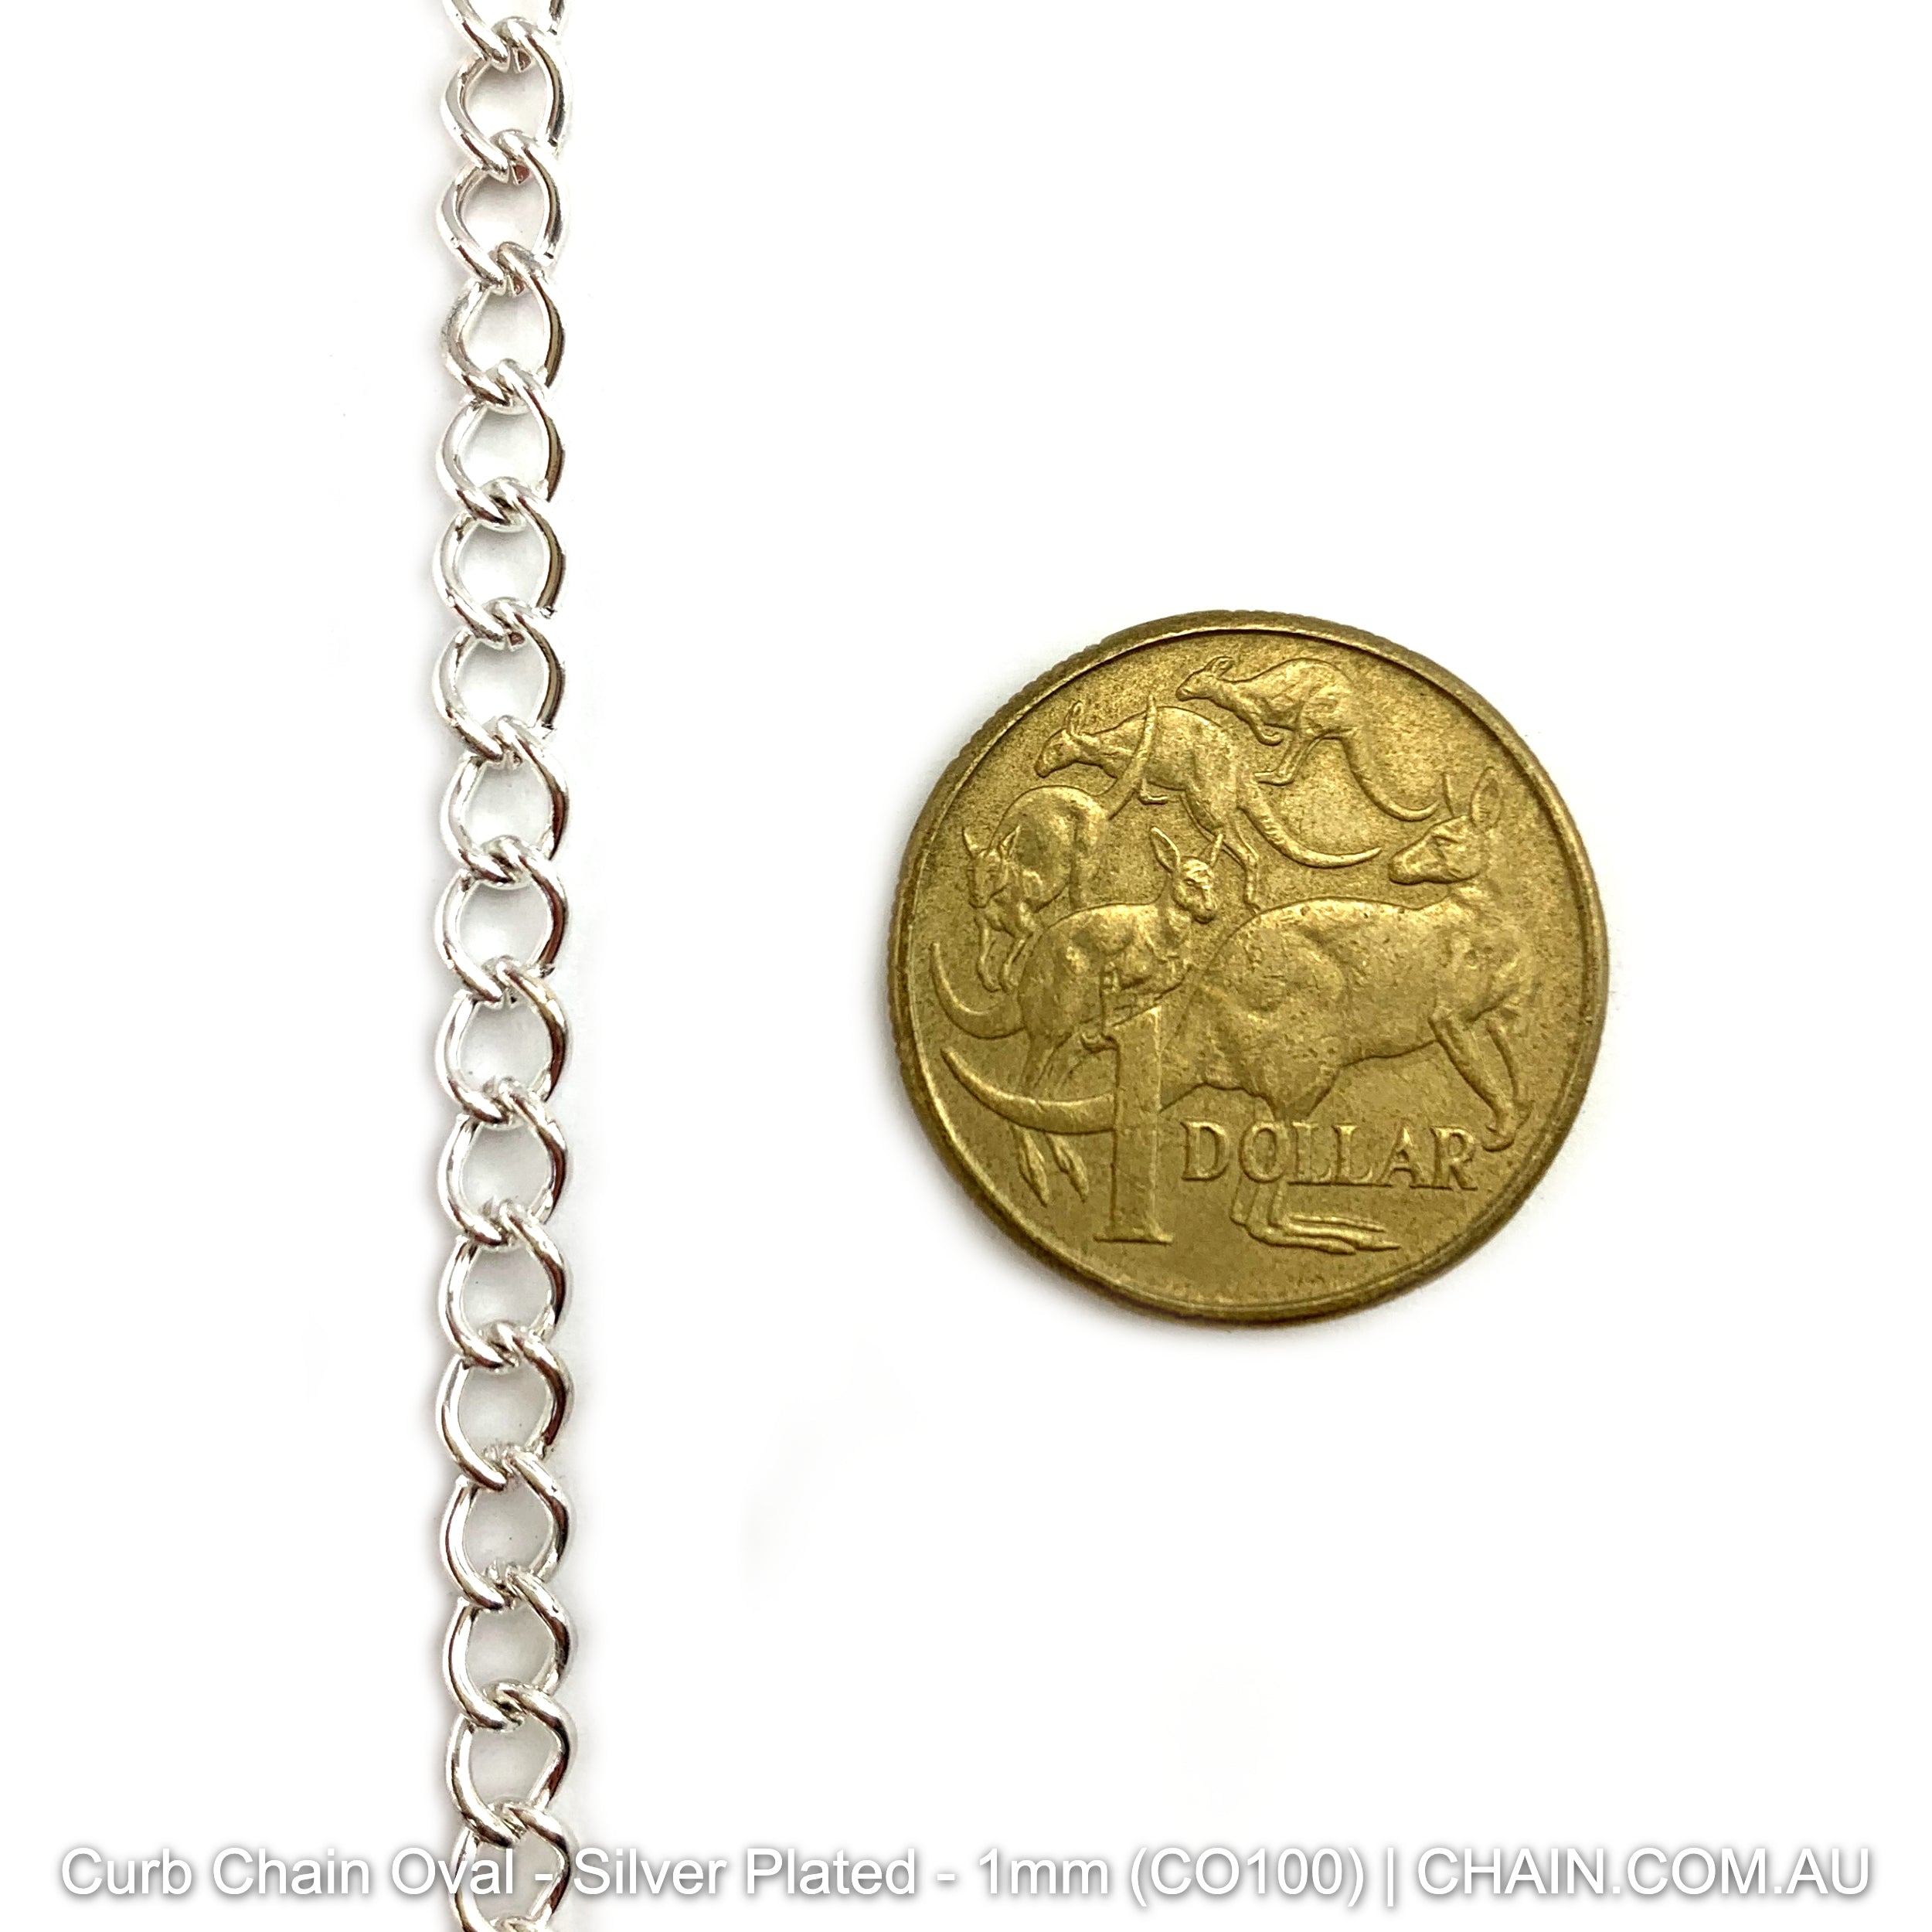 Curb Chain Oval - Silver Plated - Size: 1.0mm (CO100). Jewellery chain Australia. Shop chain online chain.com.au